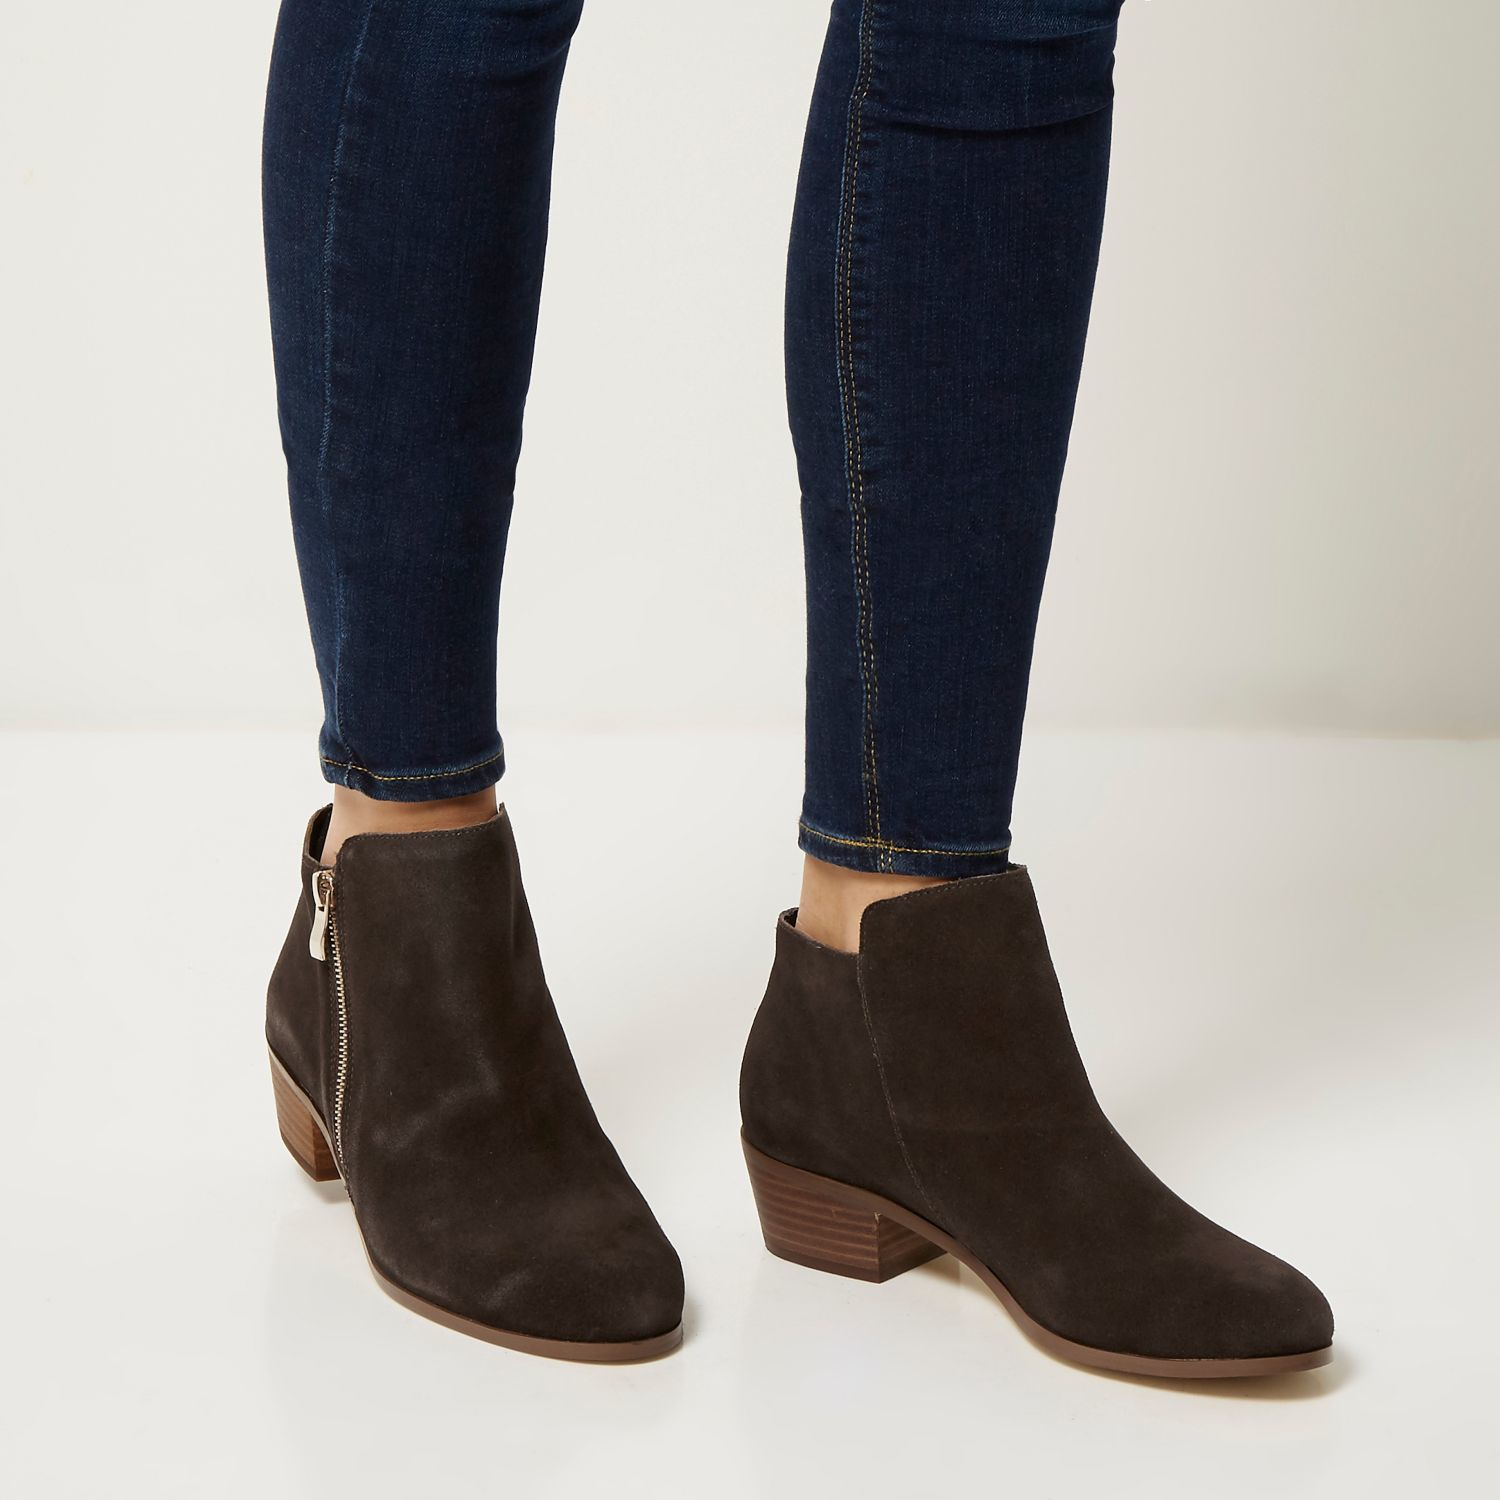 Lyst - River Island Grey Suede Zip Side Ankle Boots in Black